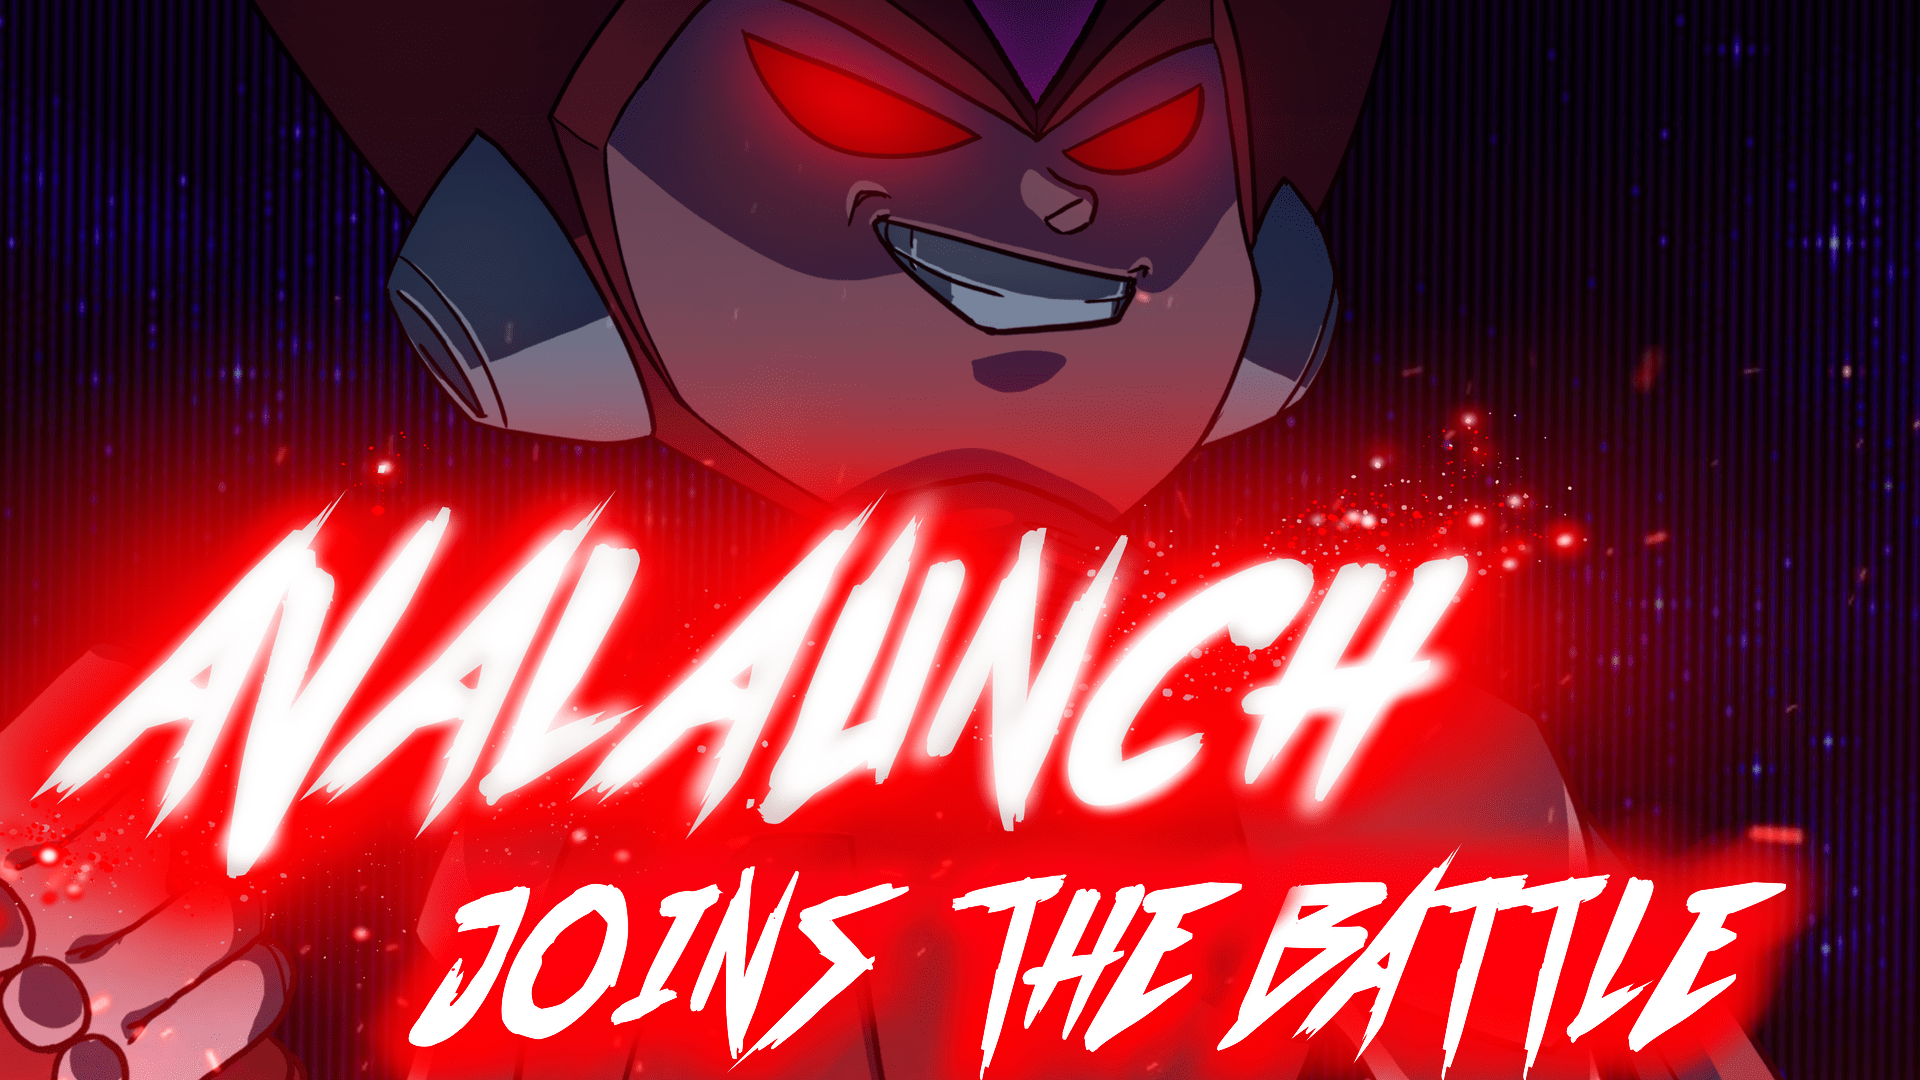 Avalaunch BOTB joins the battle